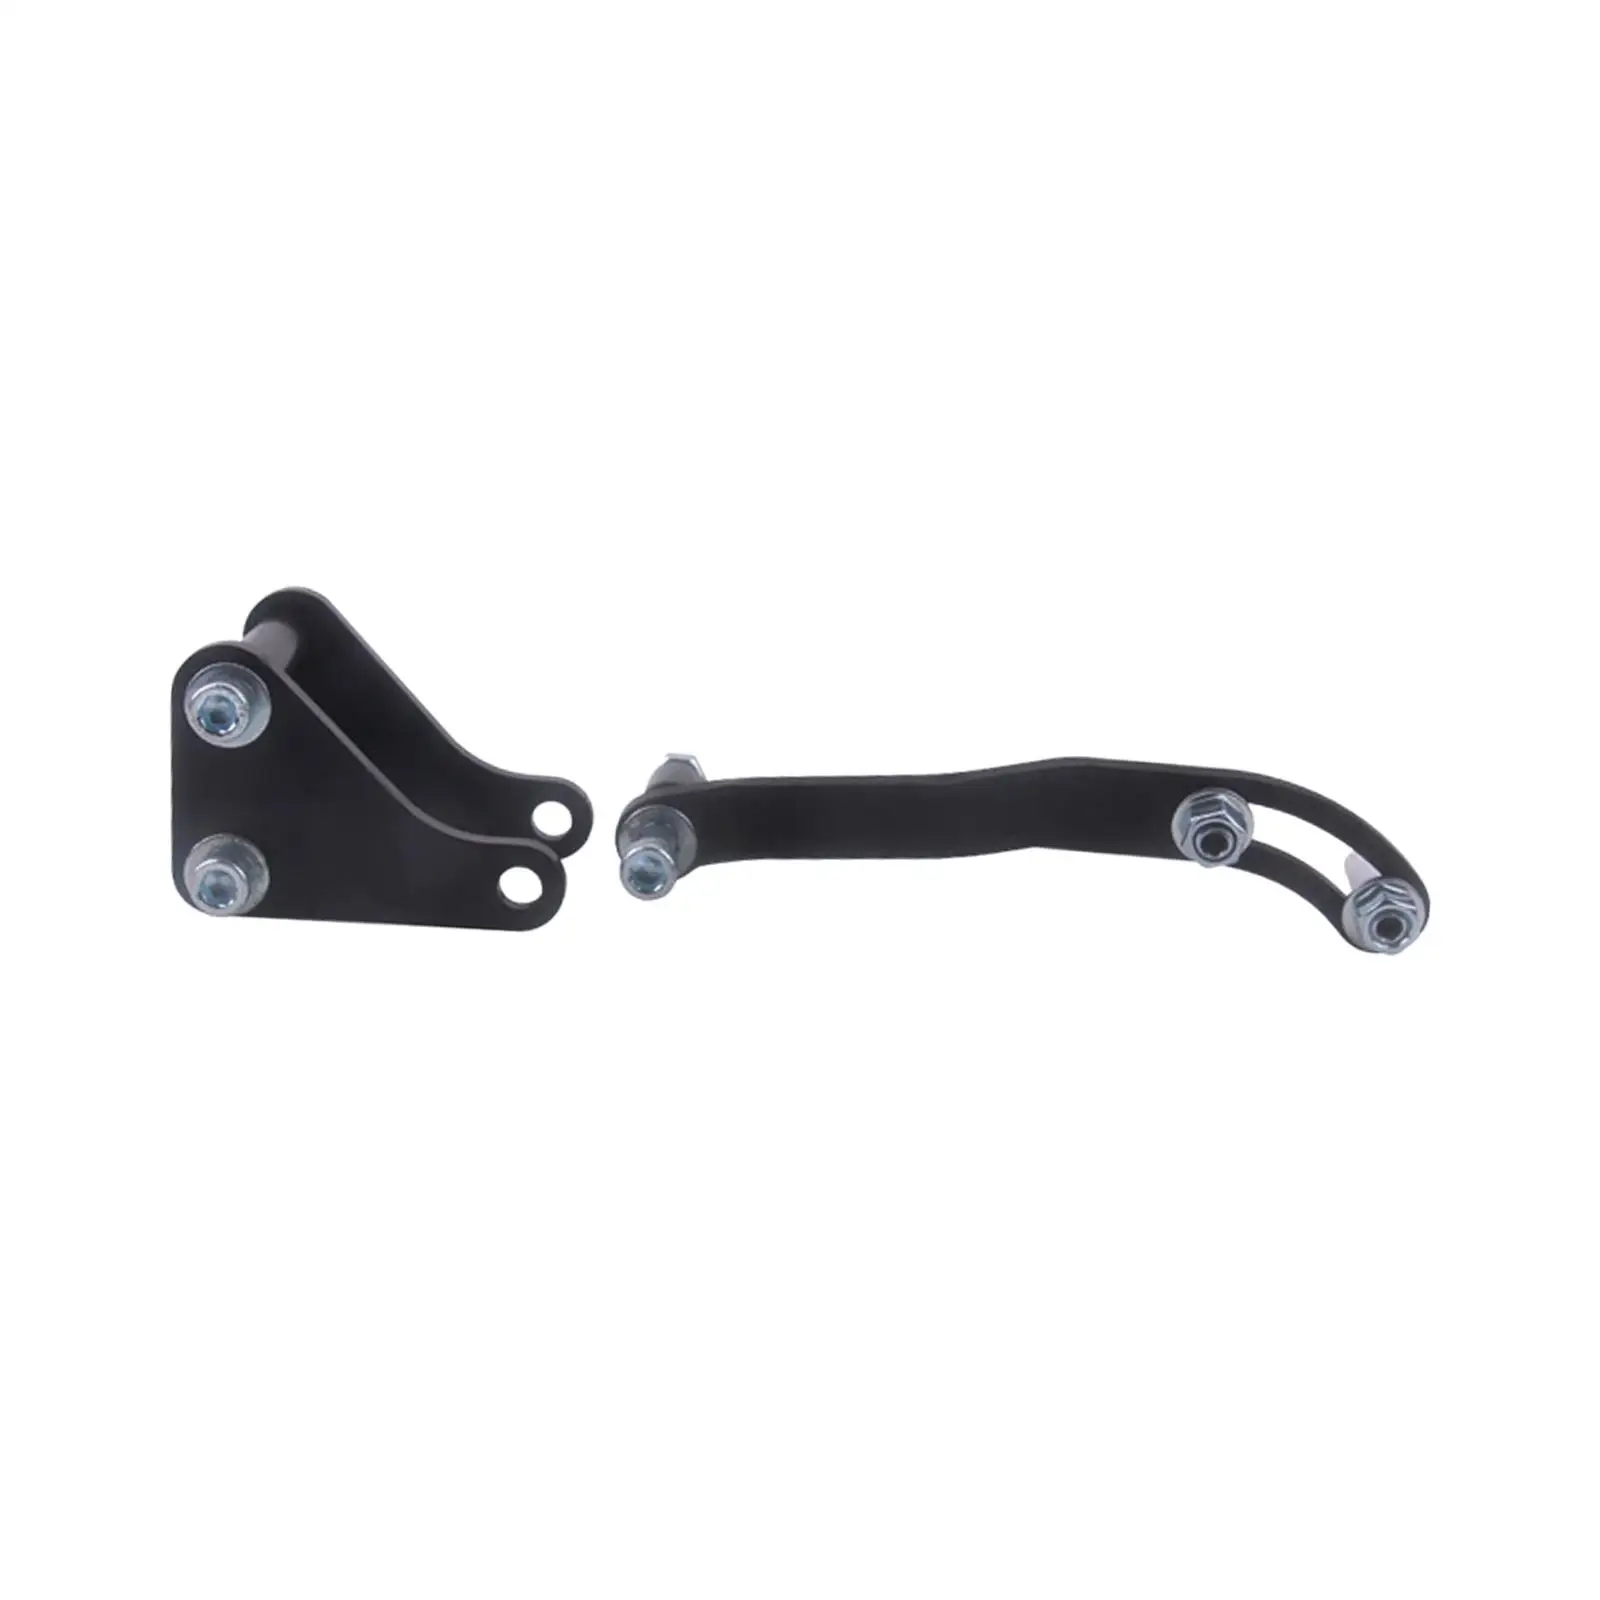 Power Steering Pump Mounting Bracket Durable Easy to Install Repair Parts for Chevy Sbc Engine 305 400 283 383